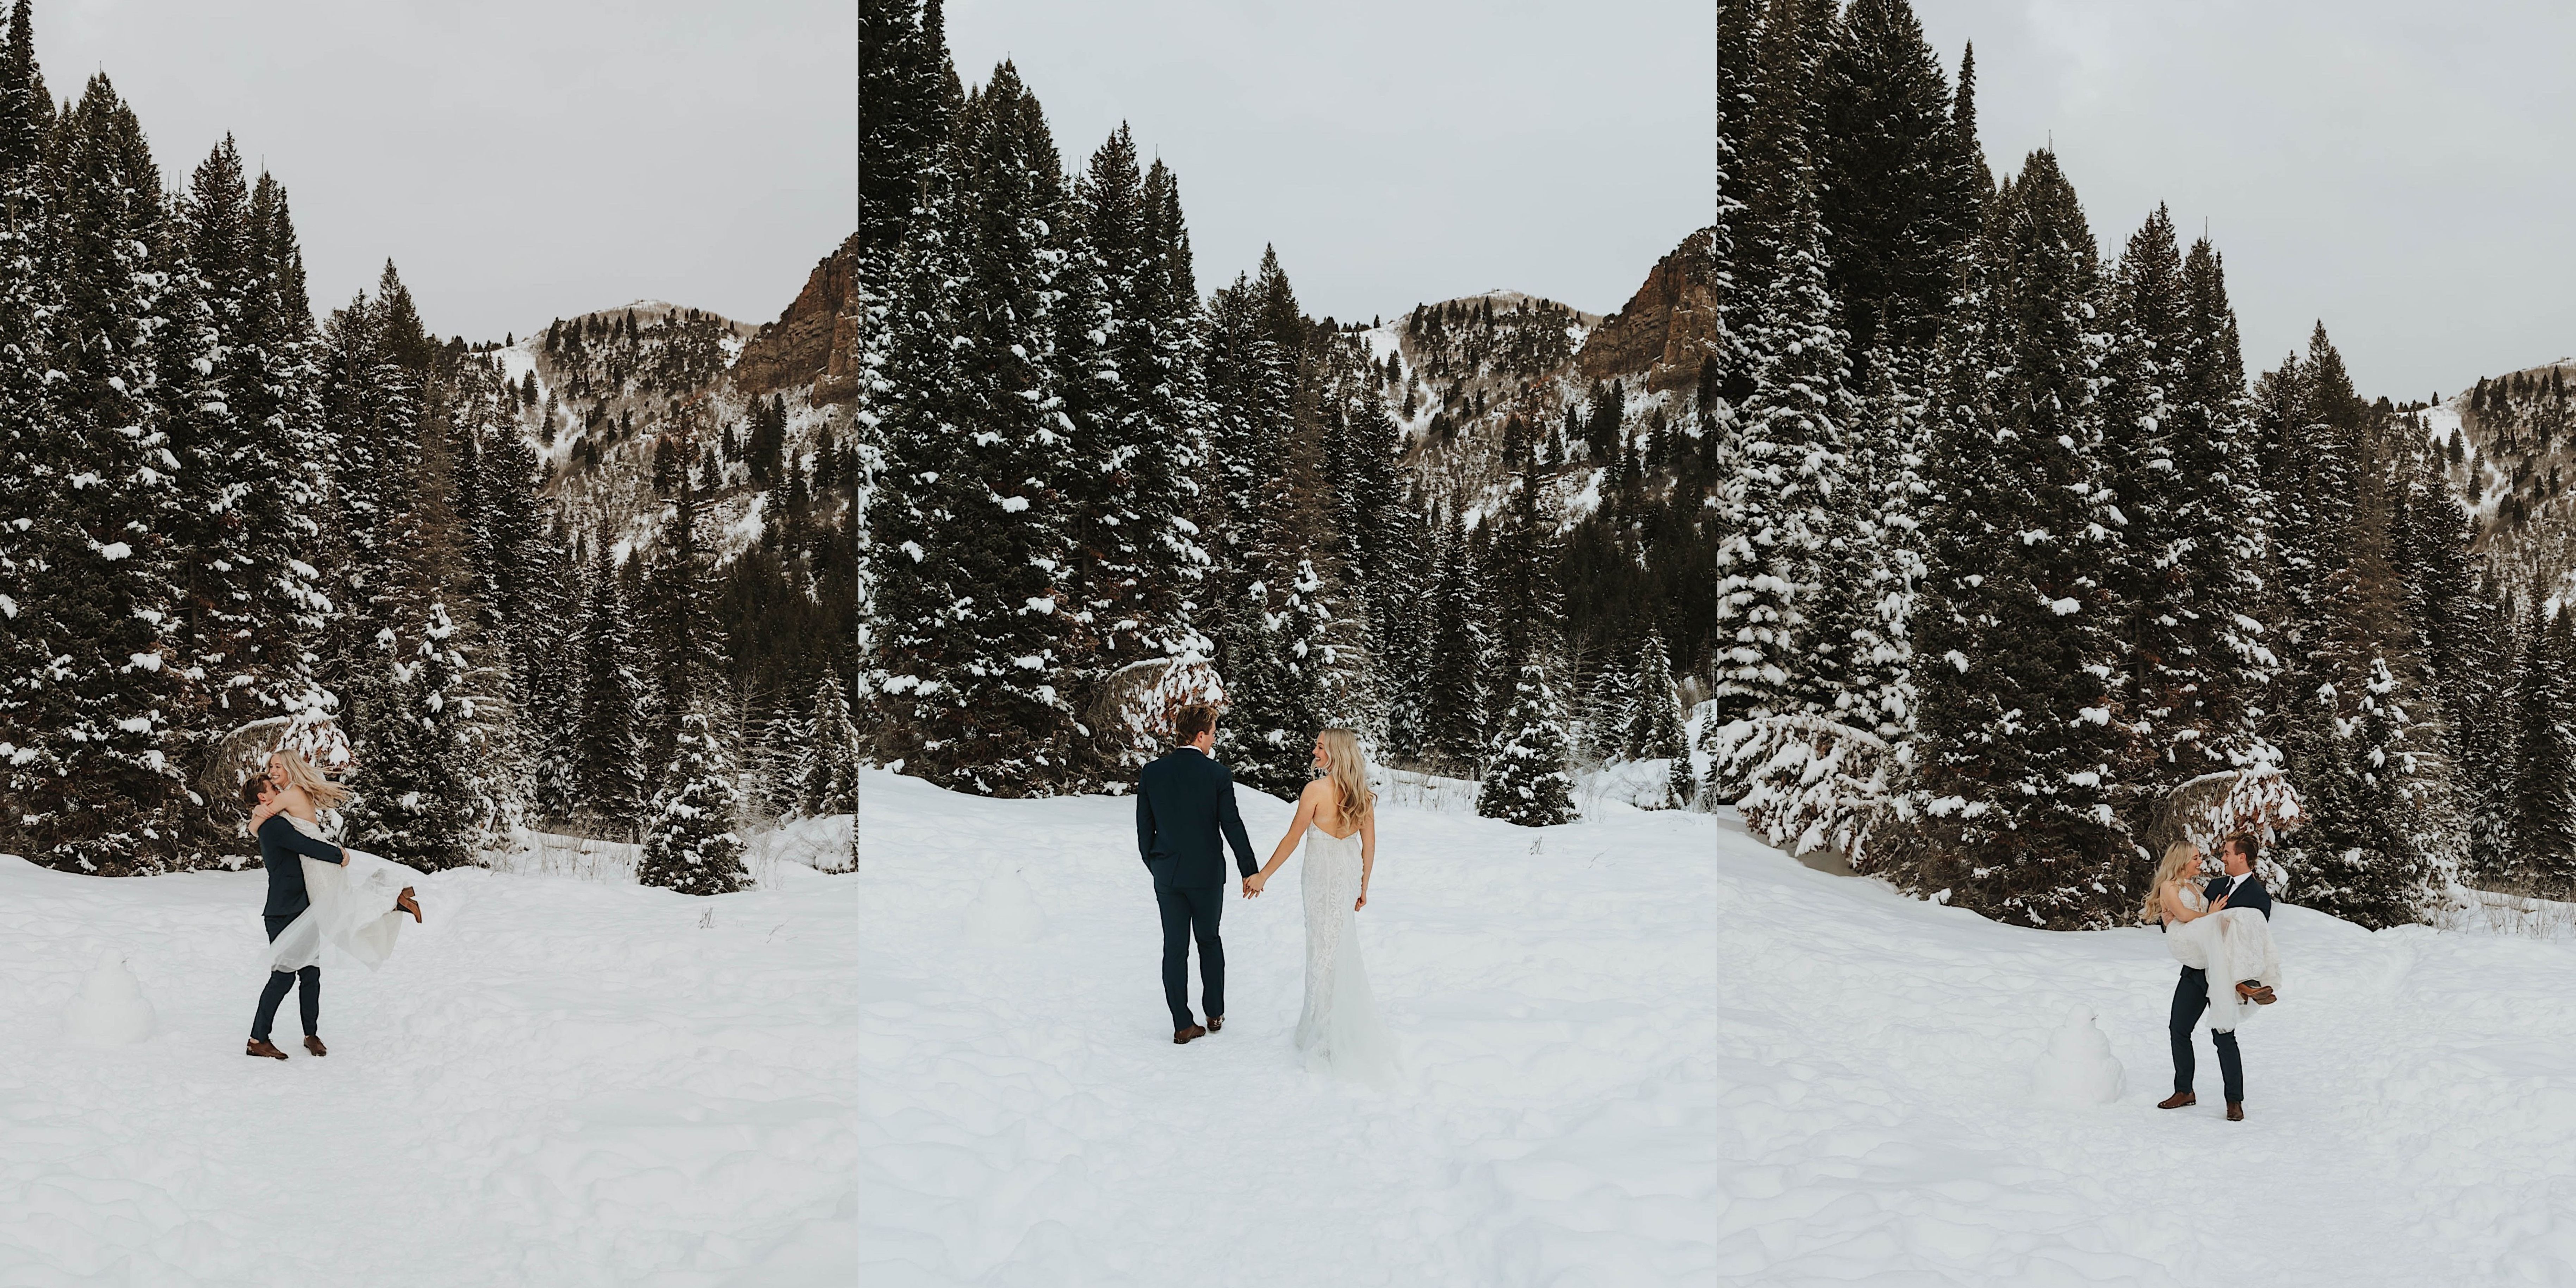 3 photos side by side of a bride and groom in a snow covered forest, the left has the groom holding and spinning the bride around, the middle is of the bride and groom holding hands facing away from the camera, and the right is of the groom holding the bride while they smile at one another